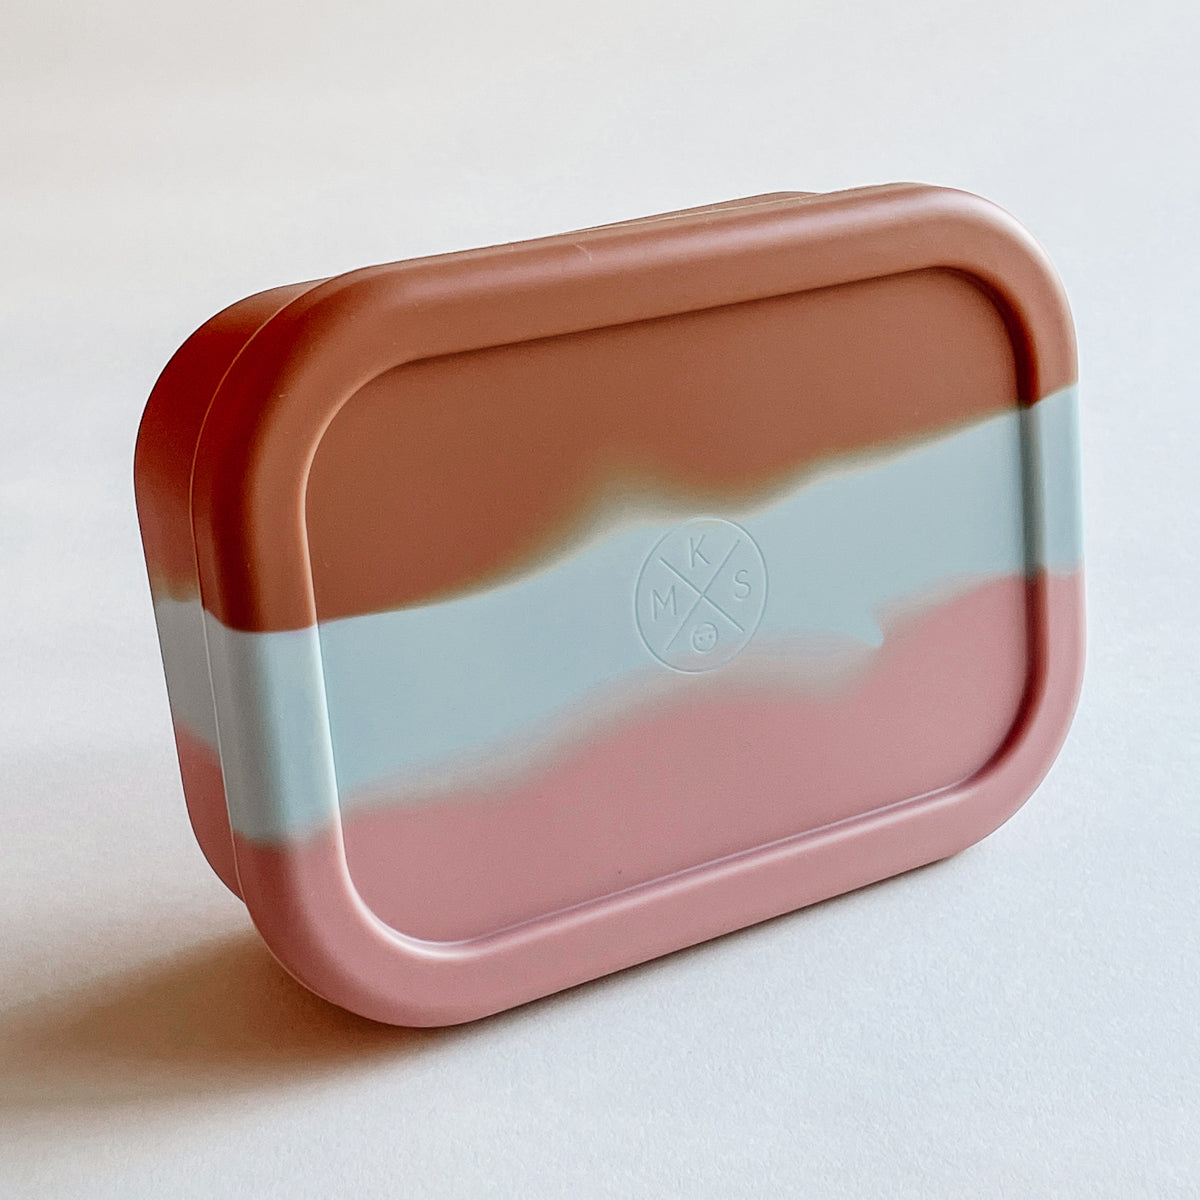 Lunch box in durable bpa free food grade silicone marble effect Sedona terracotta and pink color for kids and adults girls and boys by MKS Miminoo Gilbert Arizona USA  wholesale Faire